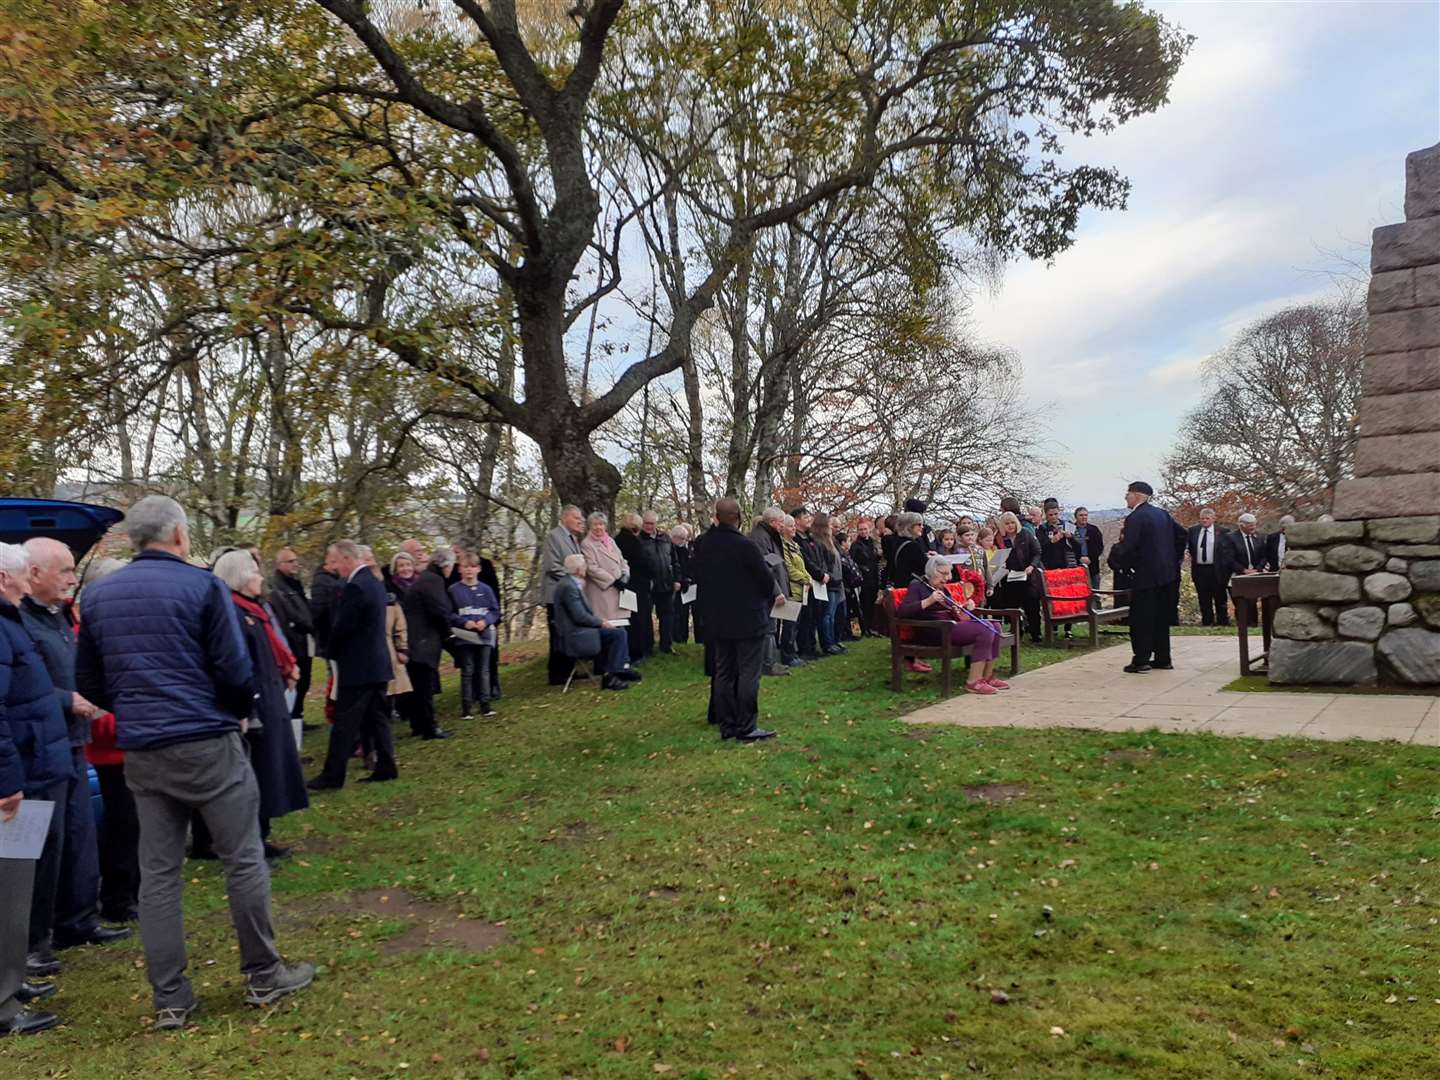 About 100 people gathered at the war memorial at Beauly Toll to mark Remembrance Sunday.